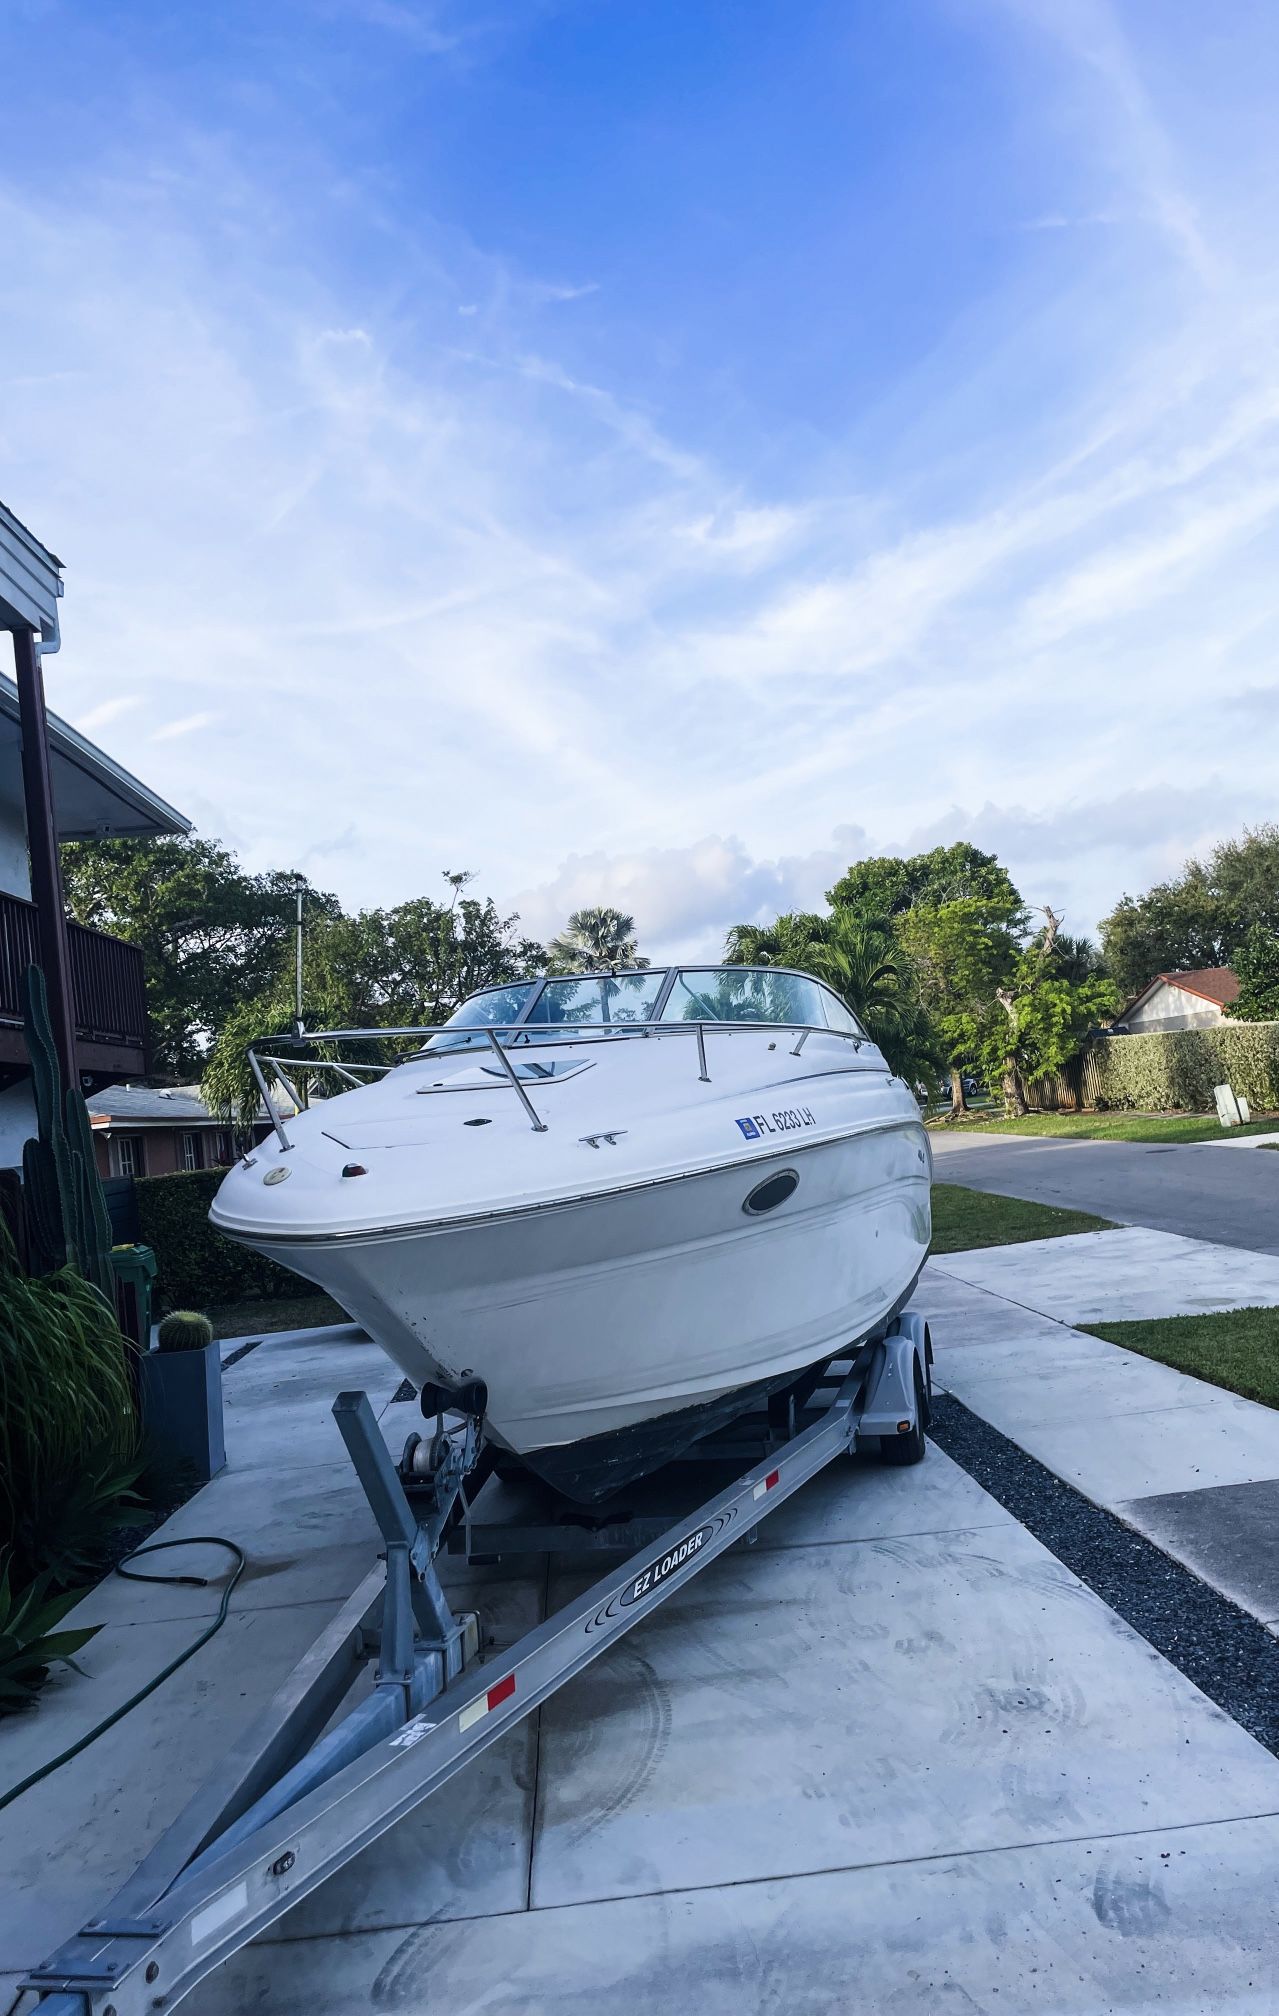 SeaRay Weekender 245 Boat with Trailer